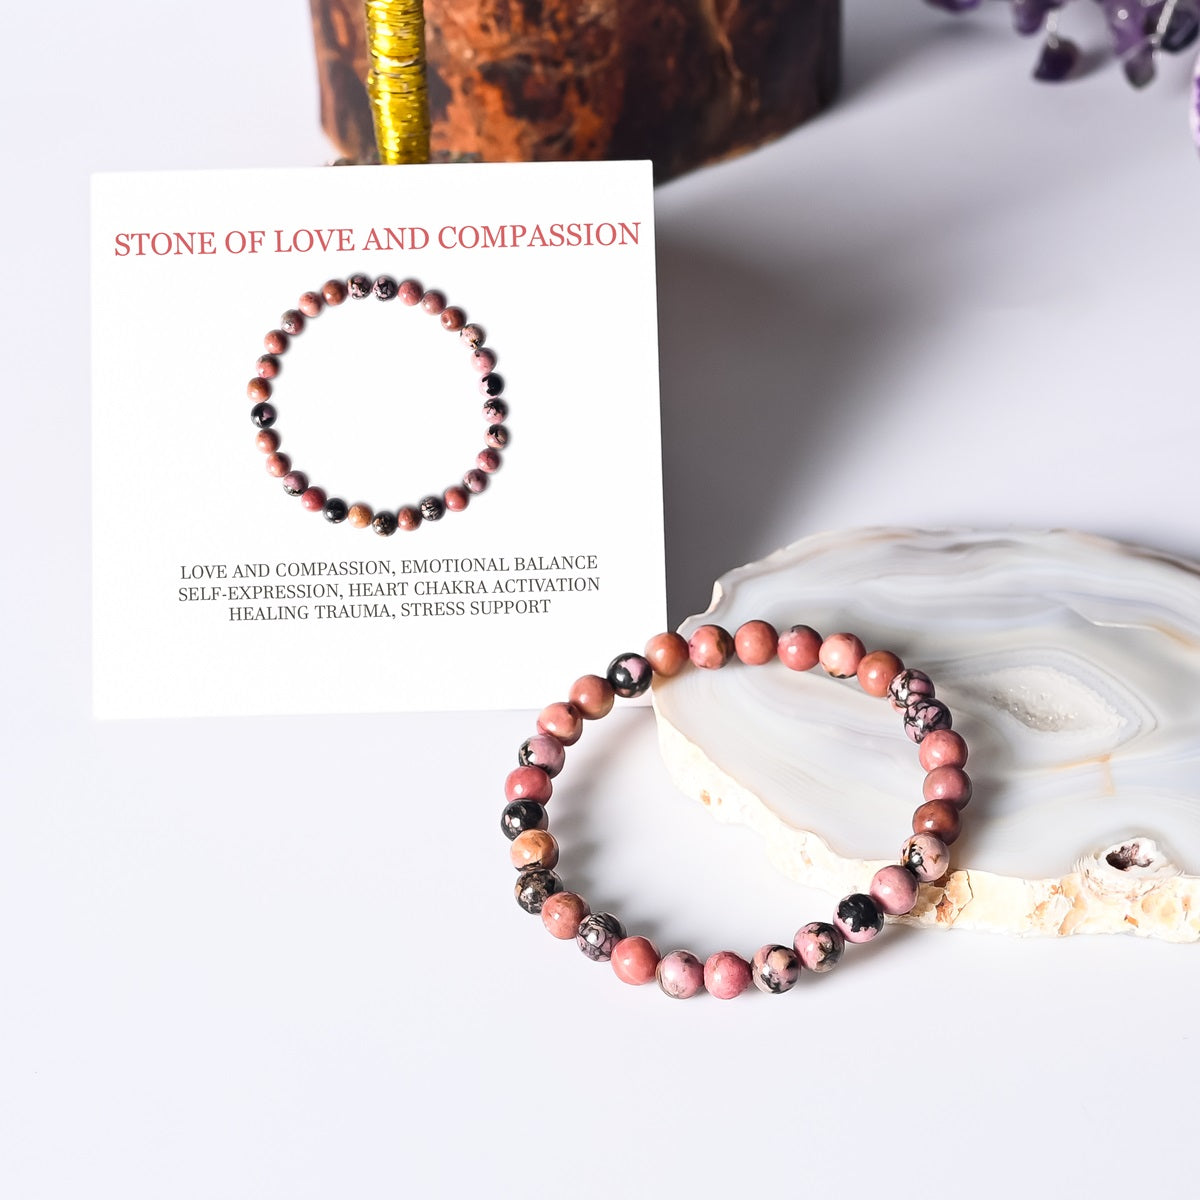 Artistic representation symbolizing love and compassion, featuring the Rhodonite Stretch Bracelet as a source of emotional healing and understanding